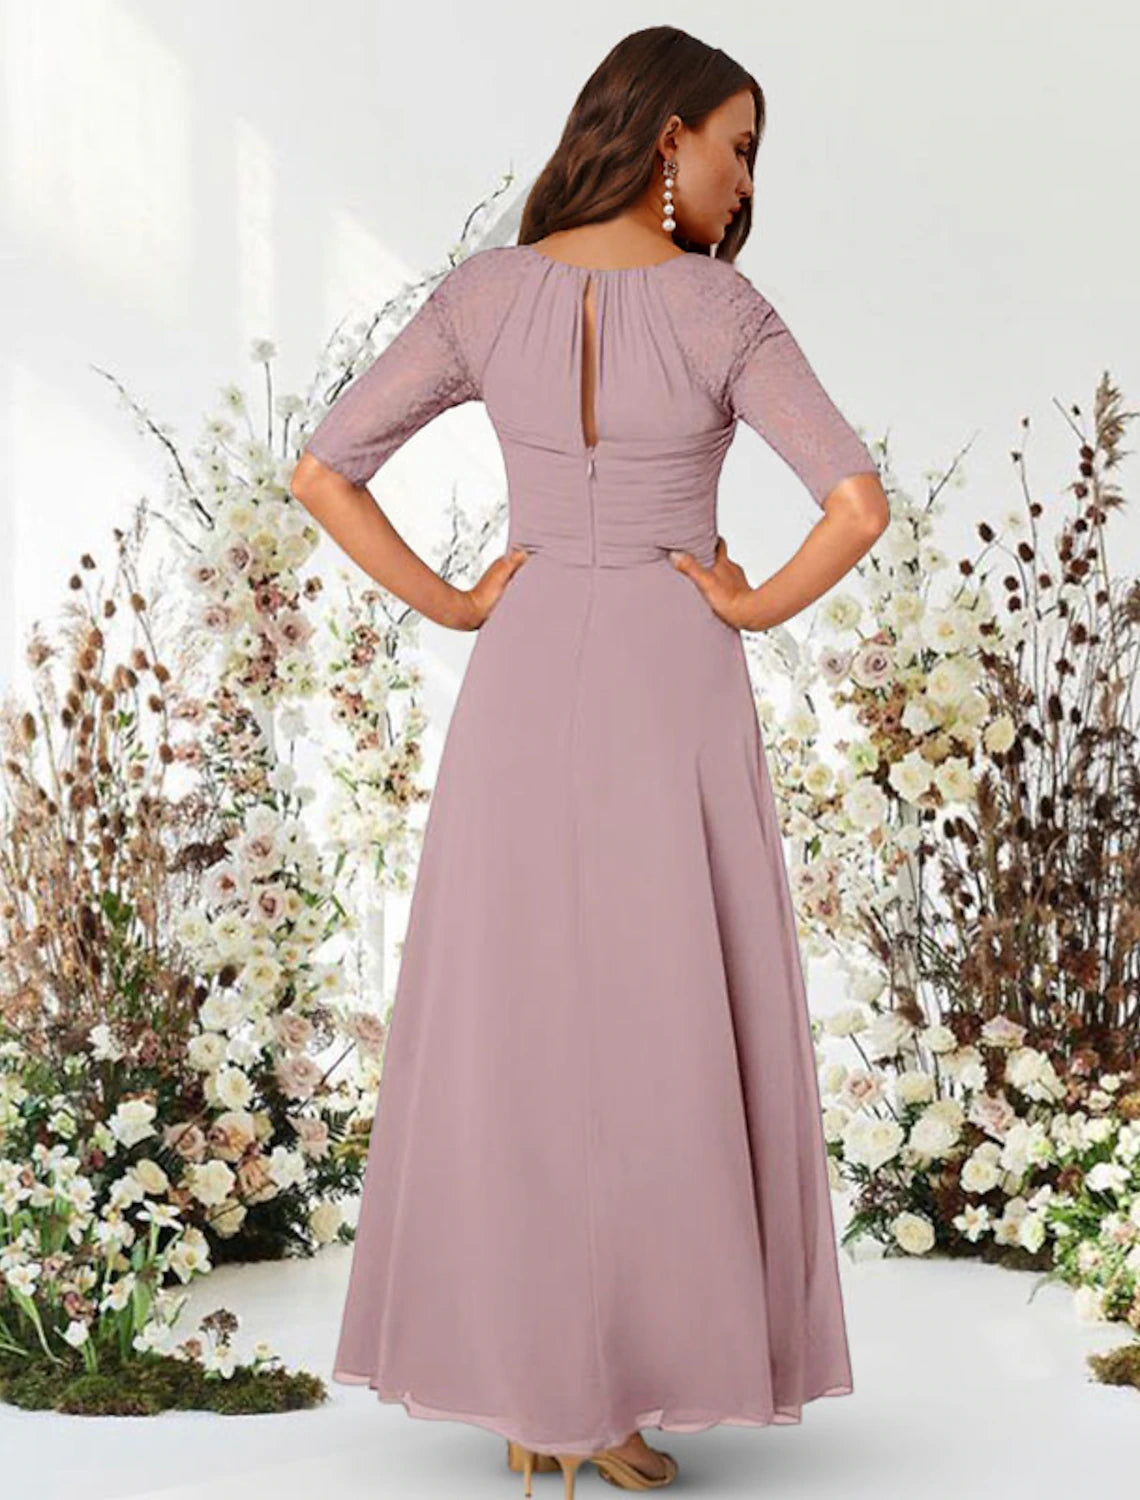 A-Line Evening Gown Elegant Dress Wedding Guest Formal Evening Floor Length Half Sleeve Jewel Neck Chiffon with Pleats Ruched